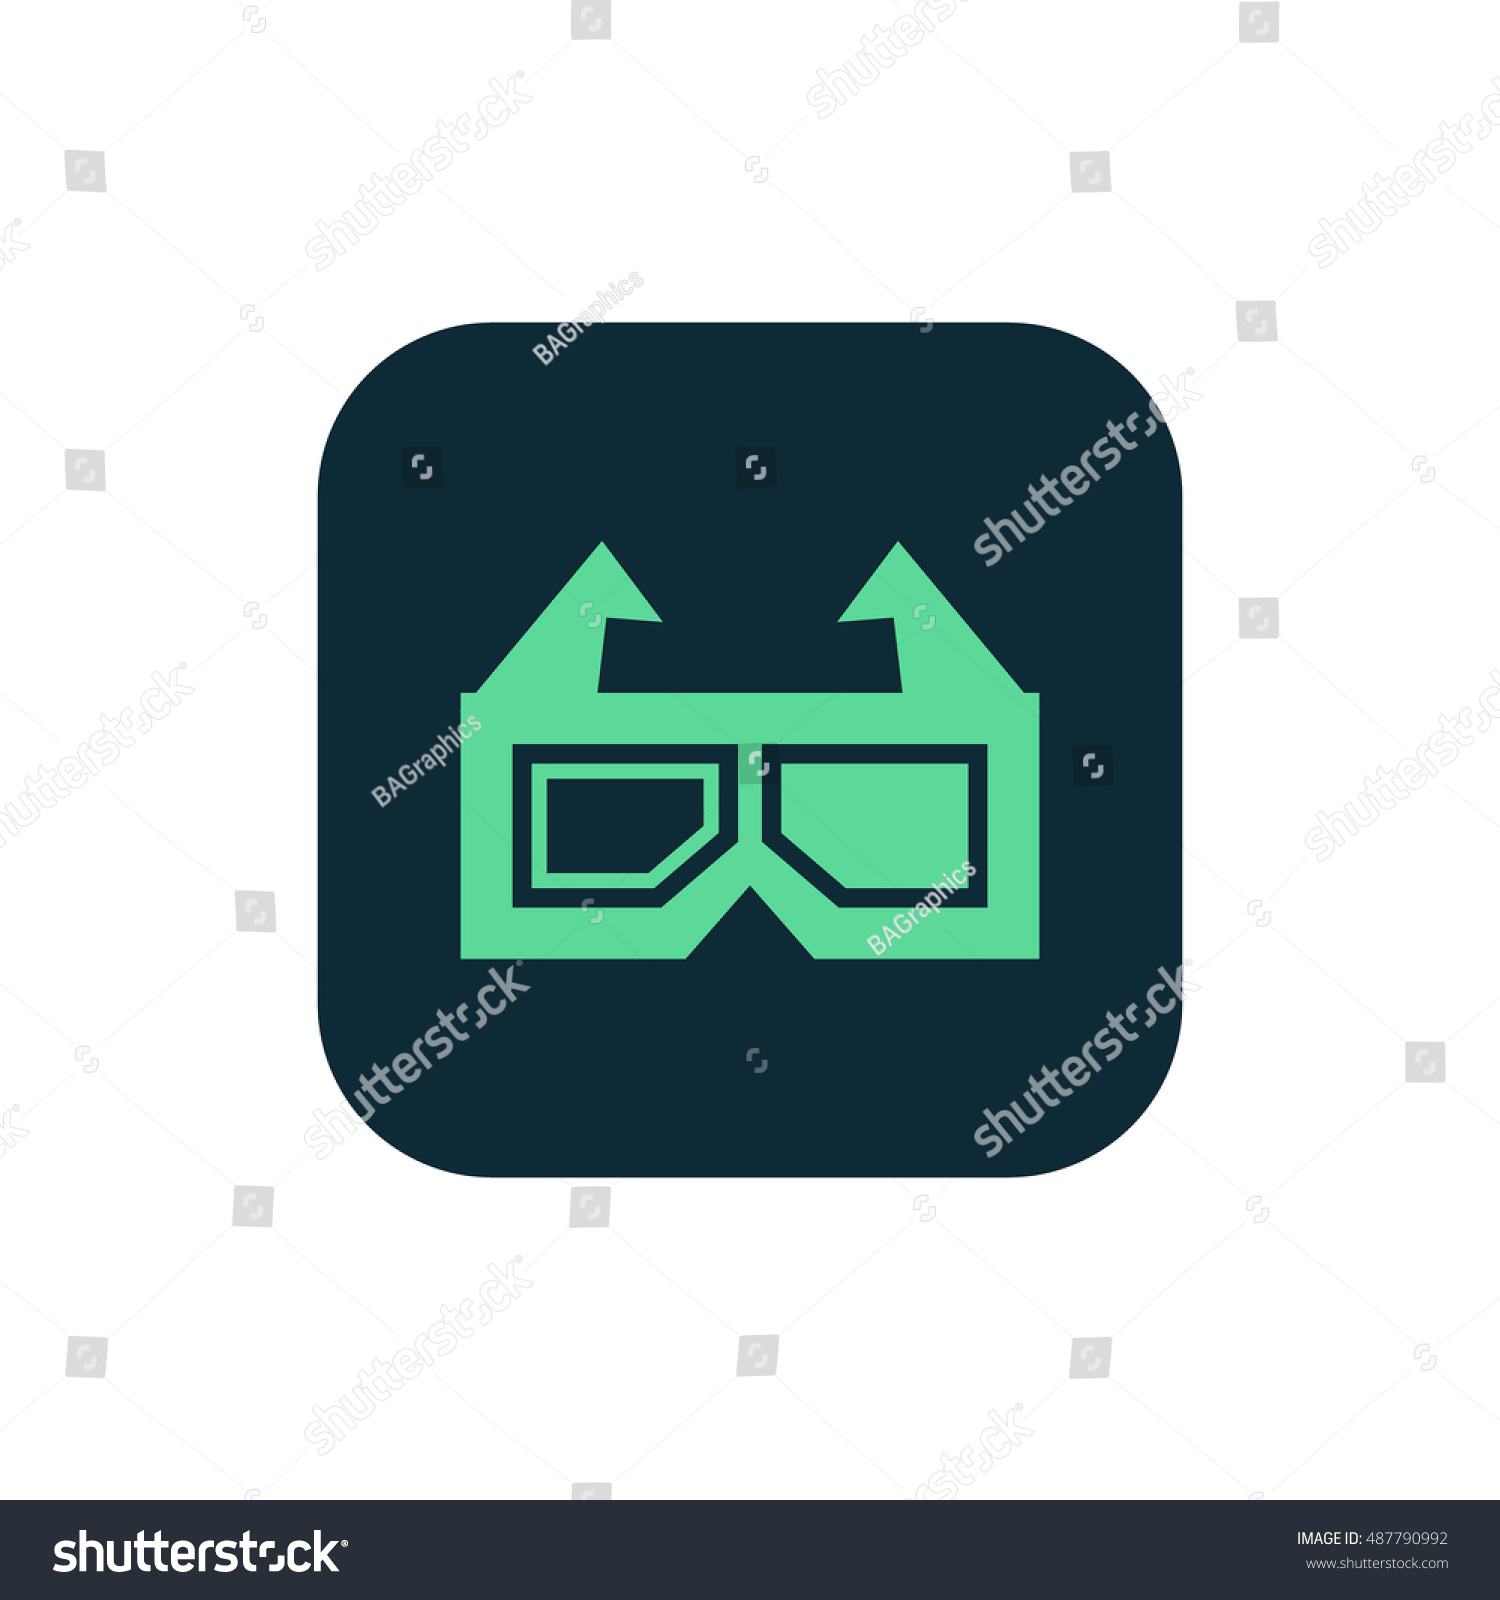 Download 3d Glasses Icon Vector Clip Art Stock Vector Royalty Free 487790992